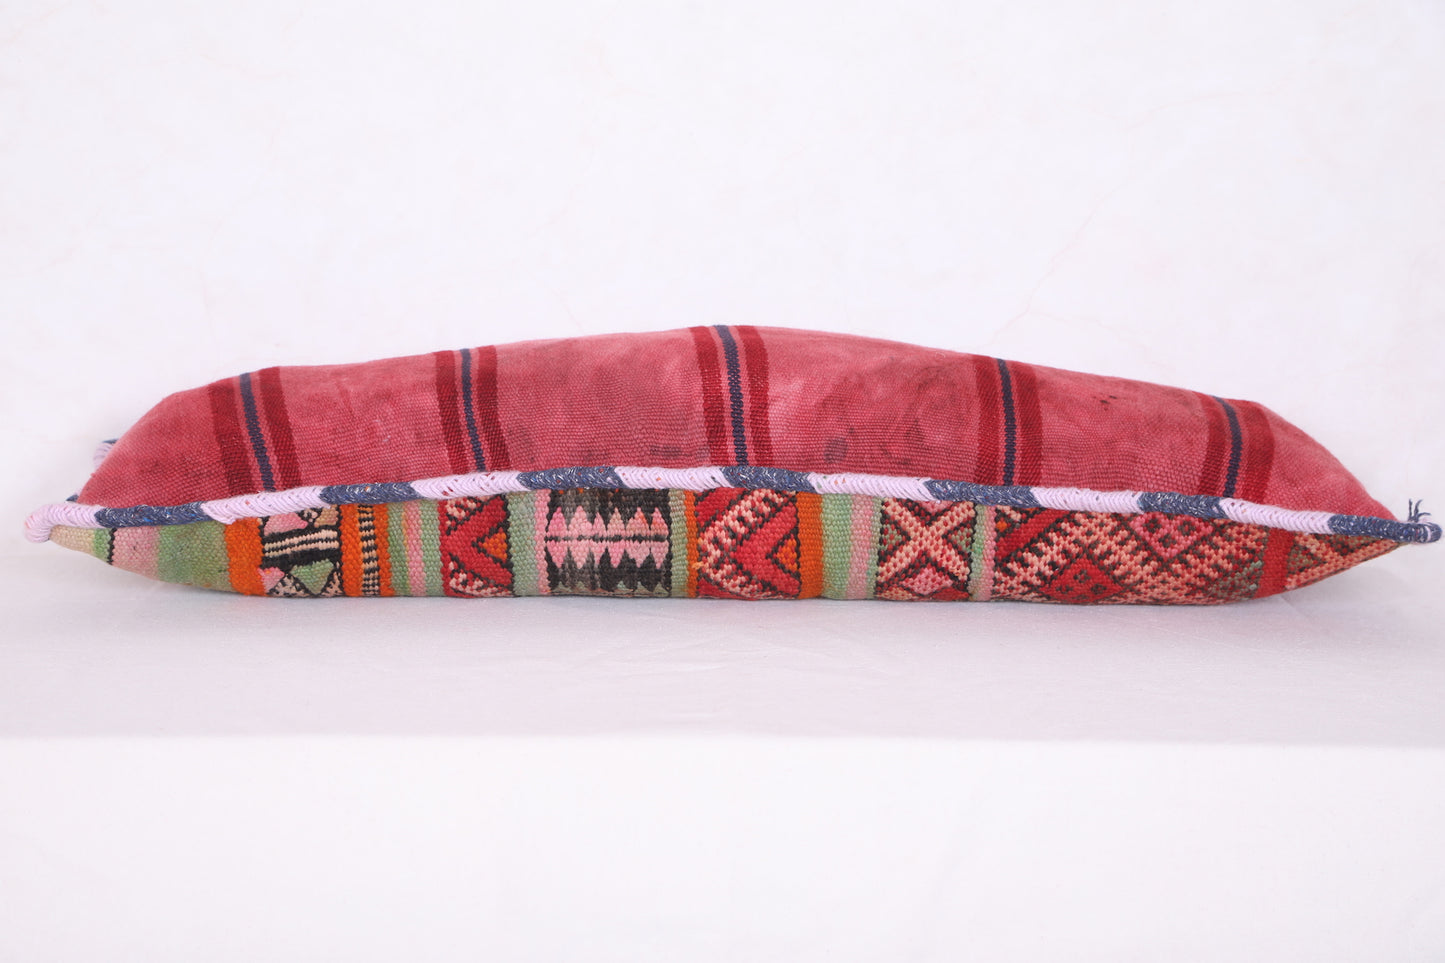 Long kilim Pillow 14.1 INCHES X 37 INCHES